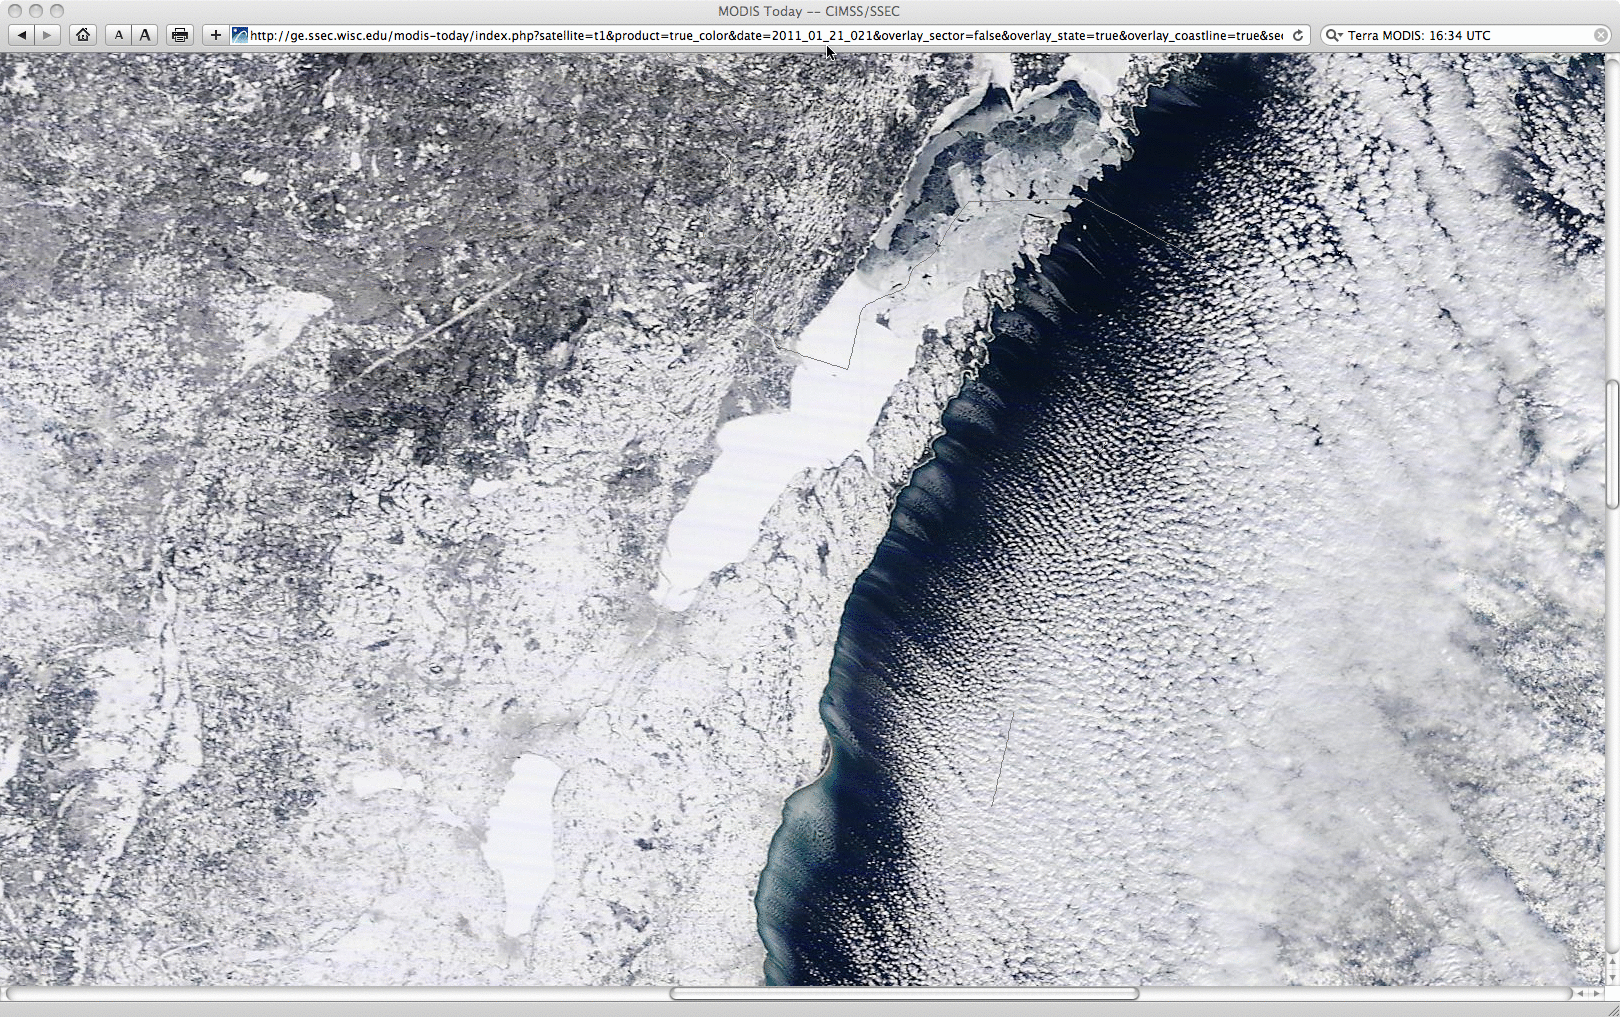 MODIS true color and false color Red/Green/Blue (RGB) images (Green Bay WI region)